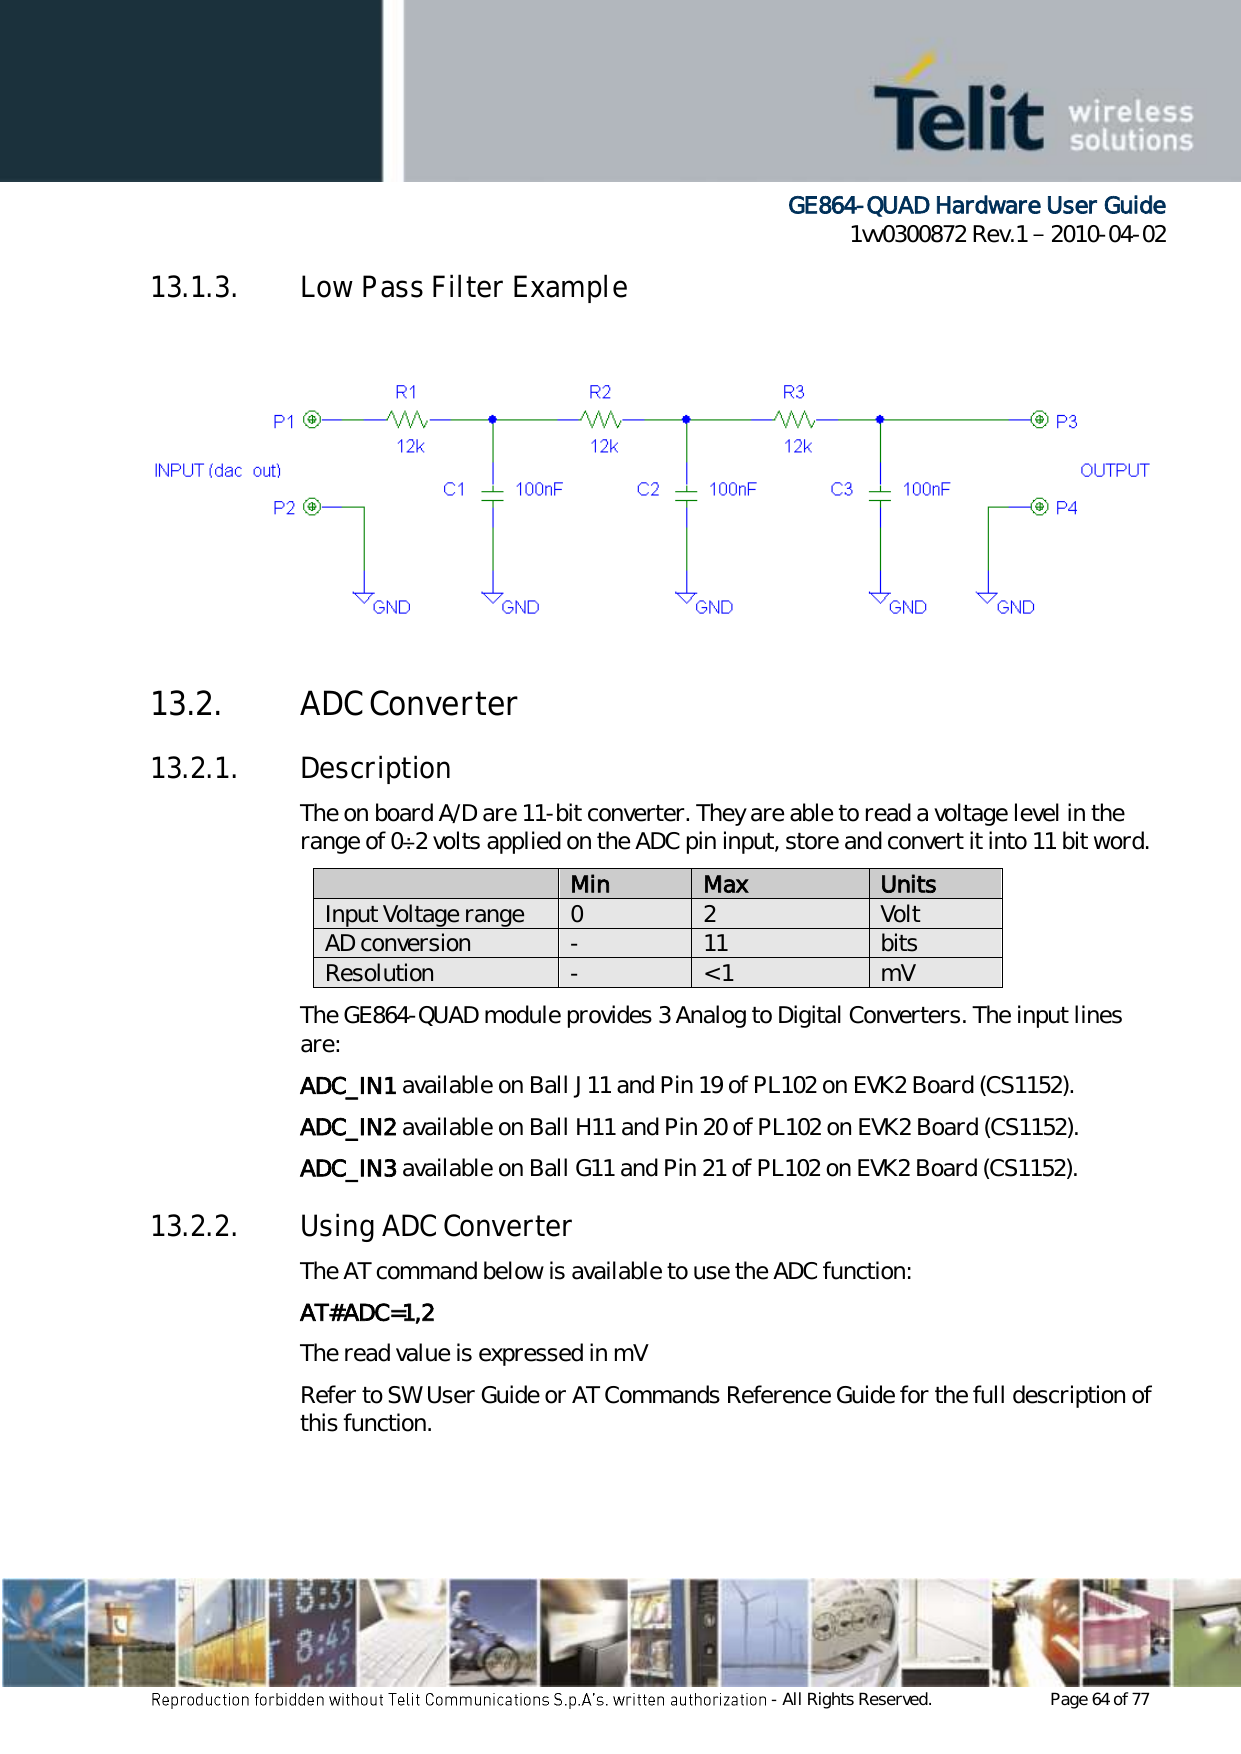      GE864-QUAD Hardware User Guide 1vv0300872 Rev.1   2010-04-02 - All Rights Reserved.    Page 64 of 77  13.1.3. Low Pass Filter Example 13.2. ADC Converter 13.2.1. Description The on board A/D are 11-bit converter. They are able to read a voltage level in the range of 0÷2 volts applied on the ADC pin input, store and convert it into 11 bit word.  Min Max Units Input Voltage range 0 2 Volt AD conversion - 11 bits Resolution - &lt; 1 mV The GE864-QUAD module provides 3 Analog to Digital Converters. The input lines are: ADC_IN1 available on Ball J11 and Pin 19 of PL102 on EVK2 Board (CS1152). ADC_IN2 available on Ball H11 and Pin 20 of PL102 on EVK2 Board (CS1152). ADC_IN3 available on Ball G11 and Pin 21 of PL102 on EVK2 Board (CS1152). 13.2.2. Using ADC Converter The AT command below is available to use the ADC function: AT#ADC=1,2 The read value is expressed in mV Refer to SW User Guide or AT Commands Reference Guide for the full description of this function. 